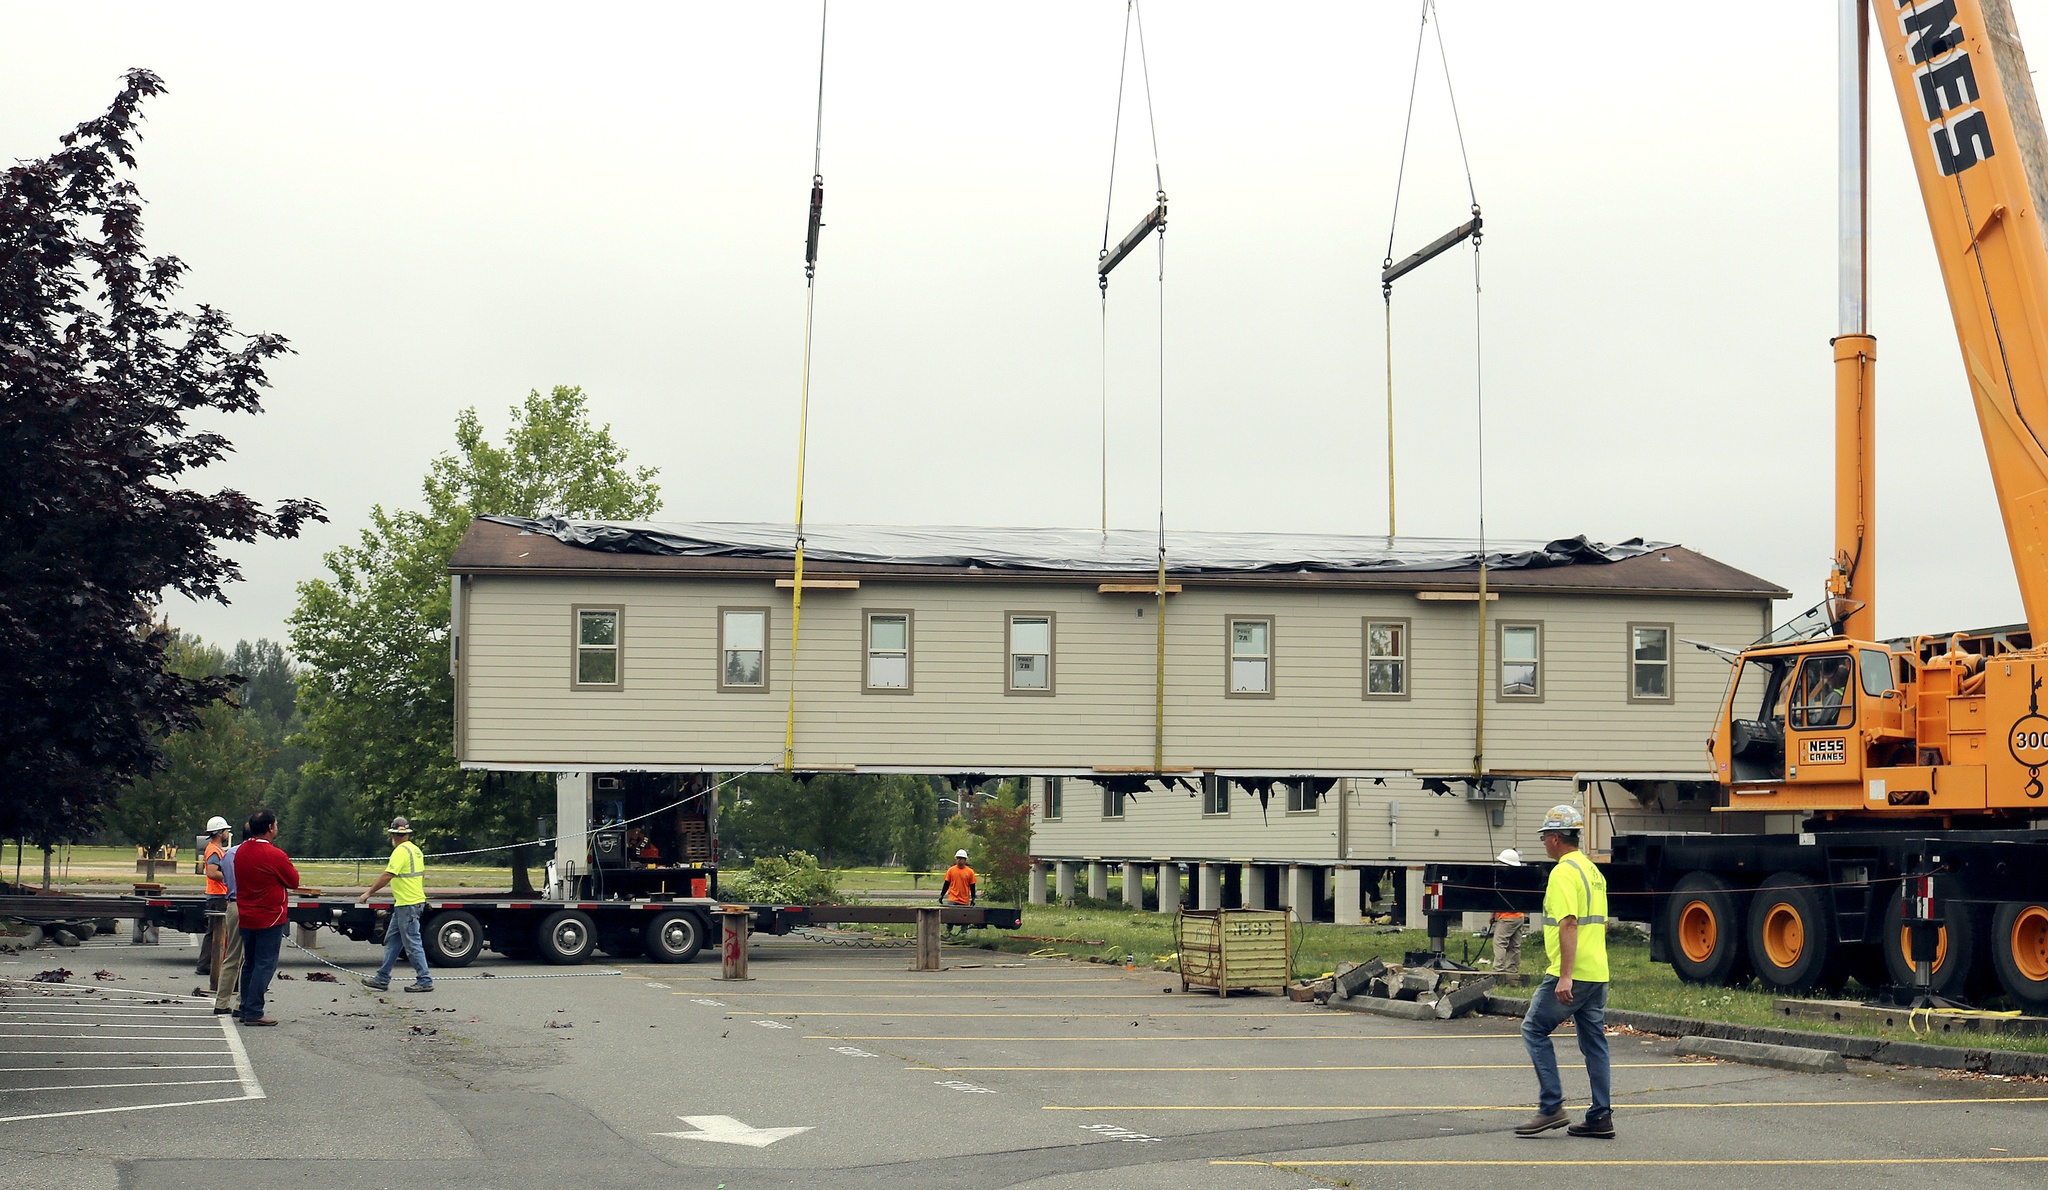 Evan Pappas/Staff PhotoA portable classroom at Mount Si High School is lifted off of its supports and onto a truck. The crew surrounds the building to make sure it is placed on the truck bed properly.